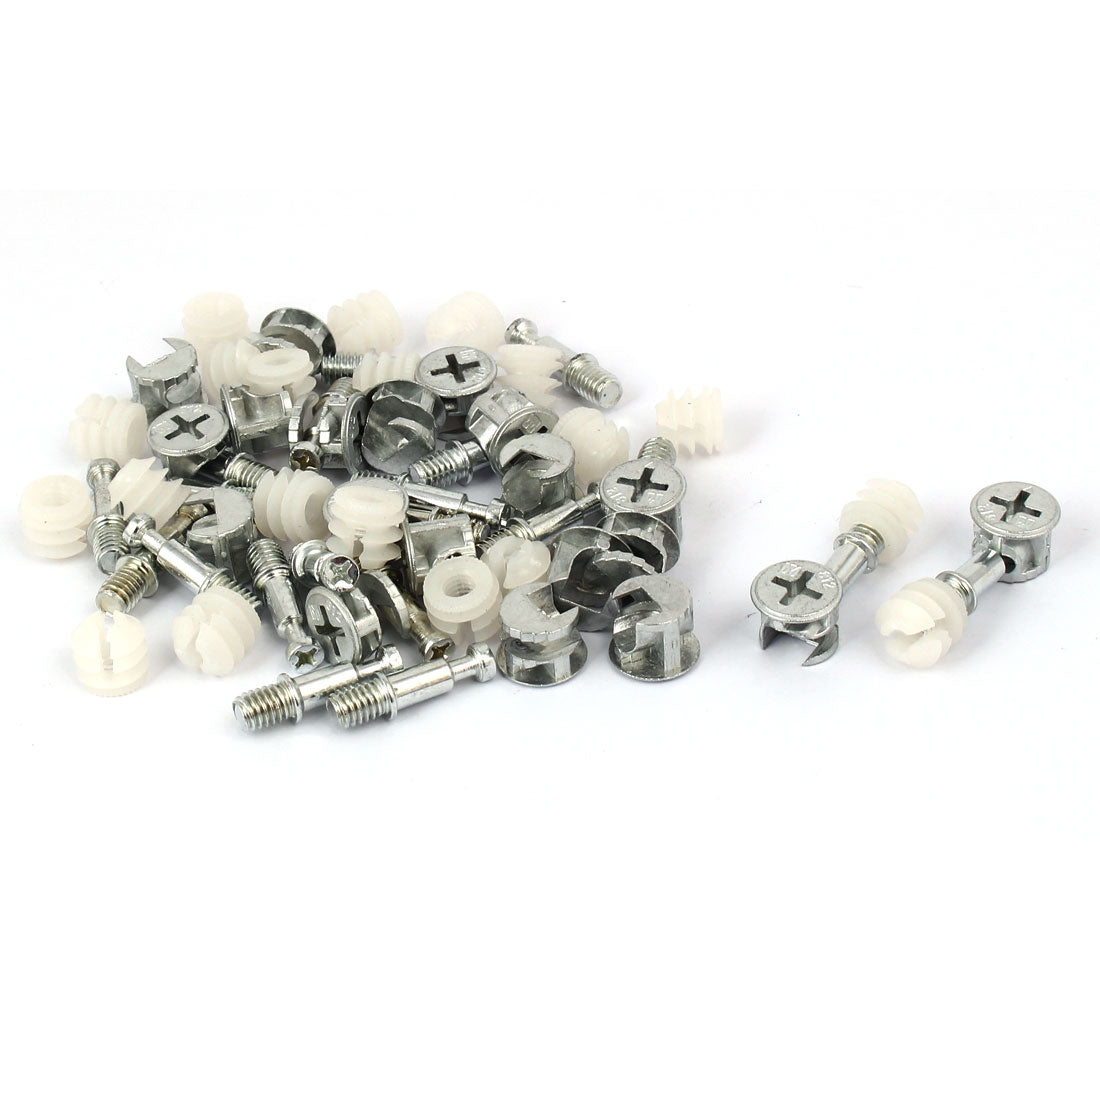 uxcell Uxcell Knock Down Furniture Eccentric  Connecting Fitting Dowel Nut Assembly 20 Sets